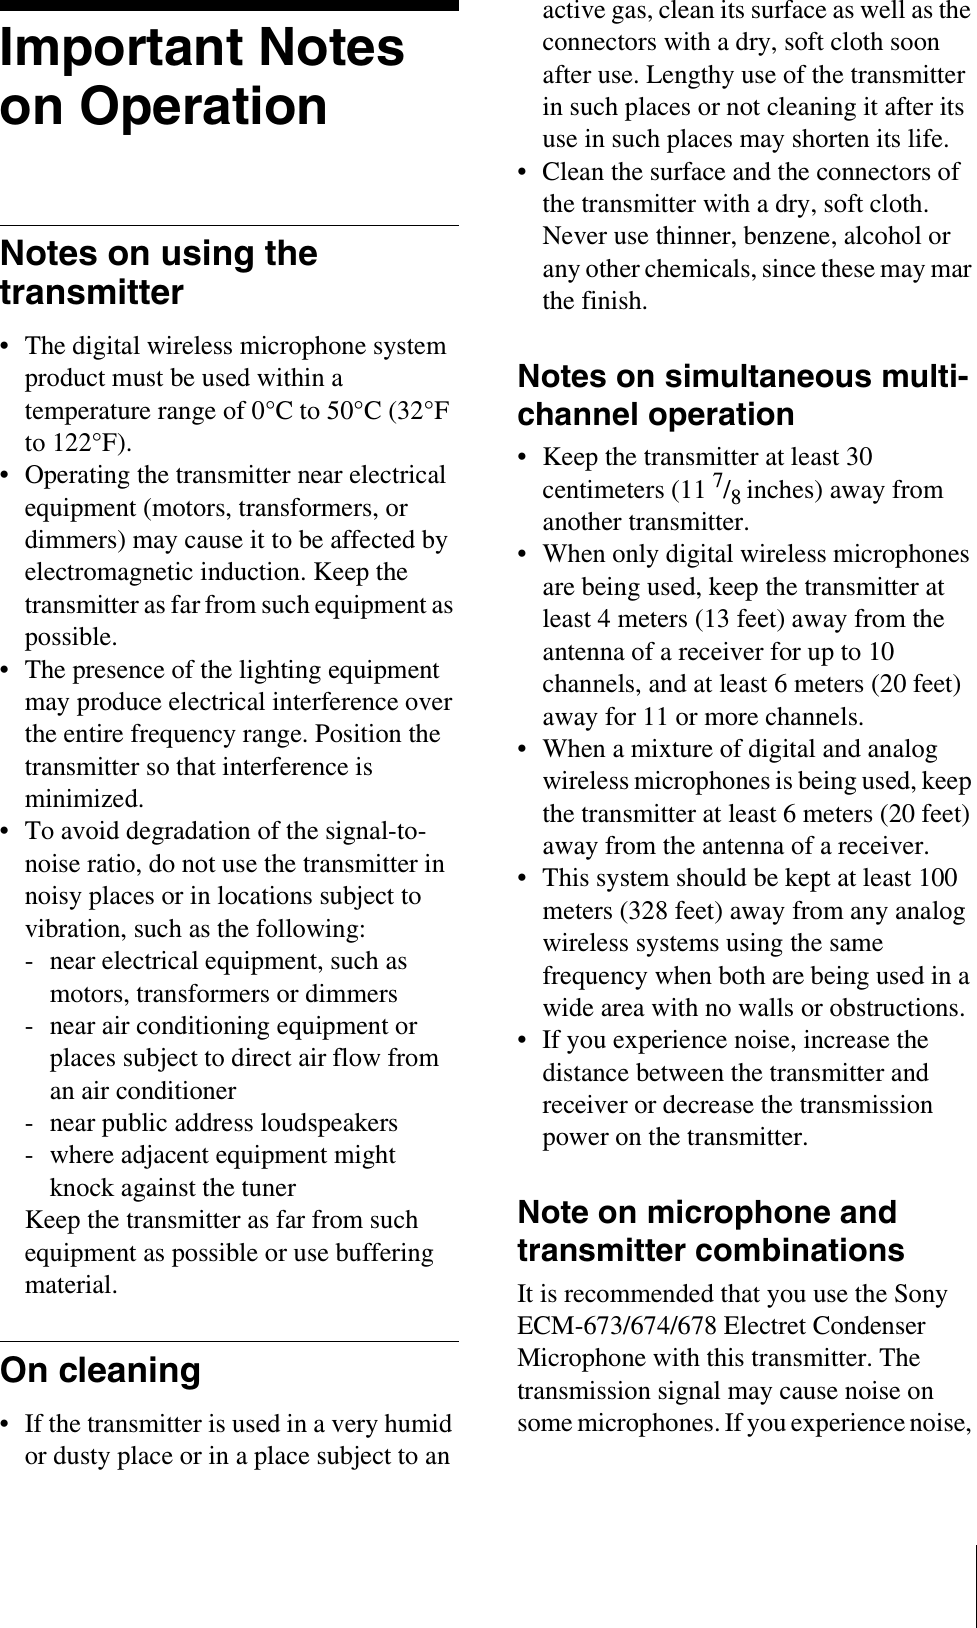 Important Notes on OperationNotes on using the transmitter• The digital wireless microphone system product must be used within a temperature range of 0°C to 50°C (32°F to 122°F).• Operating the transmitter near electrical equipment (motors, transformers, or dimmers) may cause it to be affected by electromagnetic induction. Keep the transmitter as far from such equipment as possible.• The presence of the lighting equipment may produce electrical interference over the entire frequency range. Position the transmitter so that interference is minimized.• To avoid degradation of the signal-to-noise ratio, do not use the transmitter in noisy places or in locations subject to vibration, such as the following:- near electrical equipment, such as motors, transformers or dimmers- near air conditioning equipment or places subject to direct air flow from an air conditioner- near public address loudspeakers- where adjacent equipment might knock against the tunerKeep the transmitter as far from such equipment as possible or use buffering material.On cleaning• If the transmitter is used in a very humid or dusty place or in a place subject to an active gas, clean its surface as well as the connectors with a dry, soft cloth soon after use. Lengthy use of the transmitter in such places or not cleaning it after its use in such places may shorten its life.• Clean the surface and the connectors of the transmitter with a dry, soft cloth. Never use thinner, benzene, alcohol or any other chemicals, since these may mar the finish.Notes on simultaneous multi-channel operation• Keep the transmitter at least 30 centimeters (11 7/8inches) away from another transmitter.• When only digital wireless microphones are being used, keep the transmitter at least 4 meters (13 feet) away from the antenna of a receiver for up to 10 channels, and at least 6 meters (20 feet) away for 11 or more channels.• When a mixture of digital and analog wireless microphones is being used, keep the transmitter at least 6 meters (20 feet) away from the antenna of a receiver.• This system should be kept at least 100 meters (328 feet) away from any analog wireless systems using the same frequency when both are being used in a wide area with no walls or obstructions.• If you experience noise, increase the distance between the transmitter and receiver or decrease the transmission power on the transmitter.Note on microphone and transmitter combinationsIt is recommended that you use the Sony ECM-673/674/678 Electret Condenser Microphone with this transmitter. The transmission signal may cause noise on some microphones. If you experience noise, 